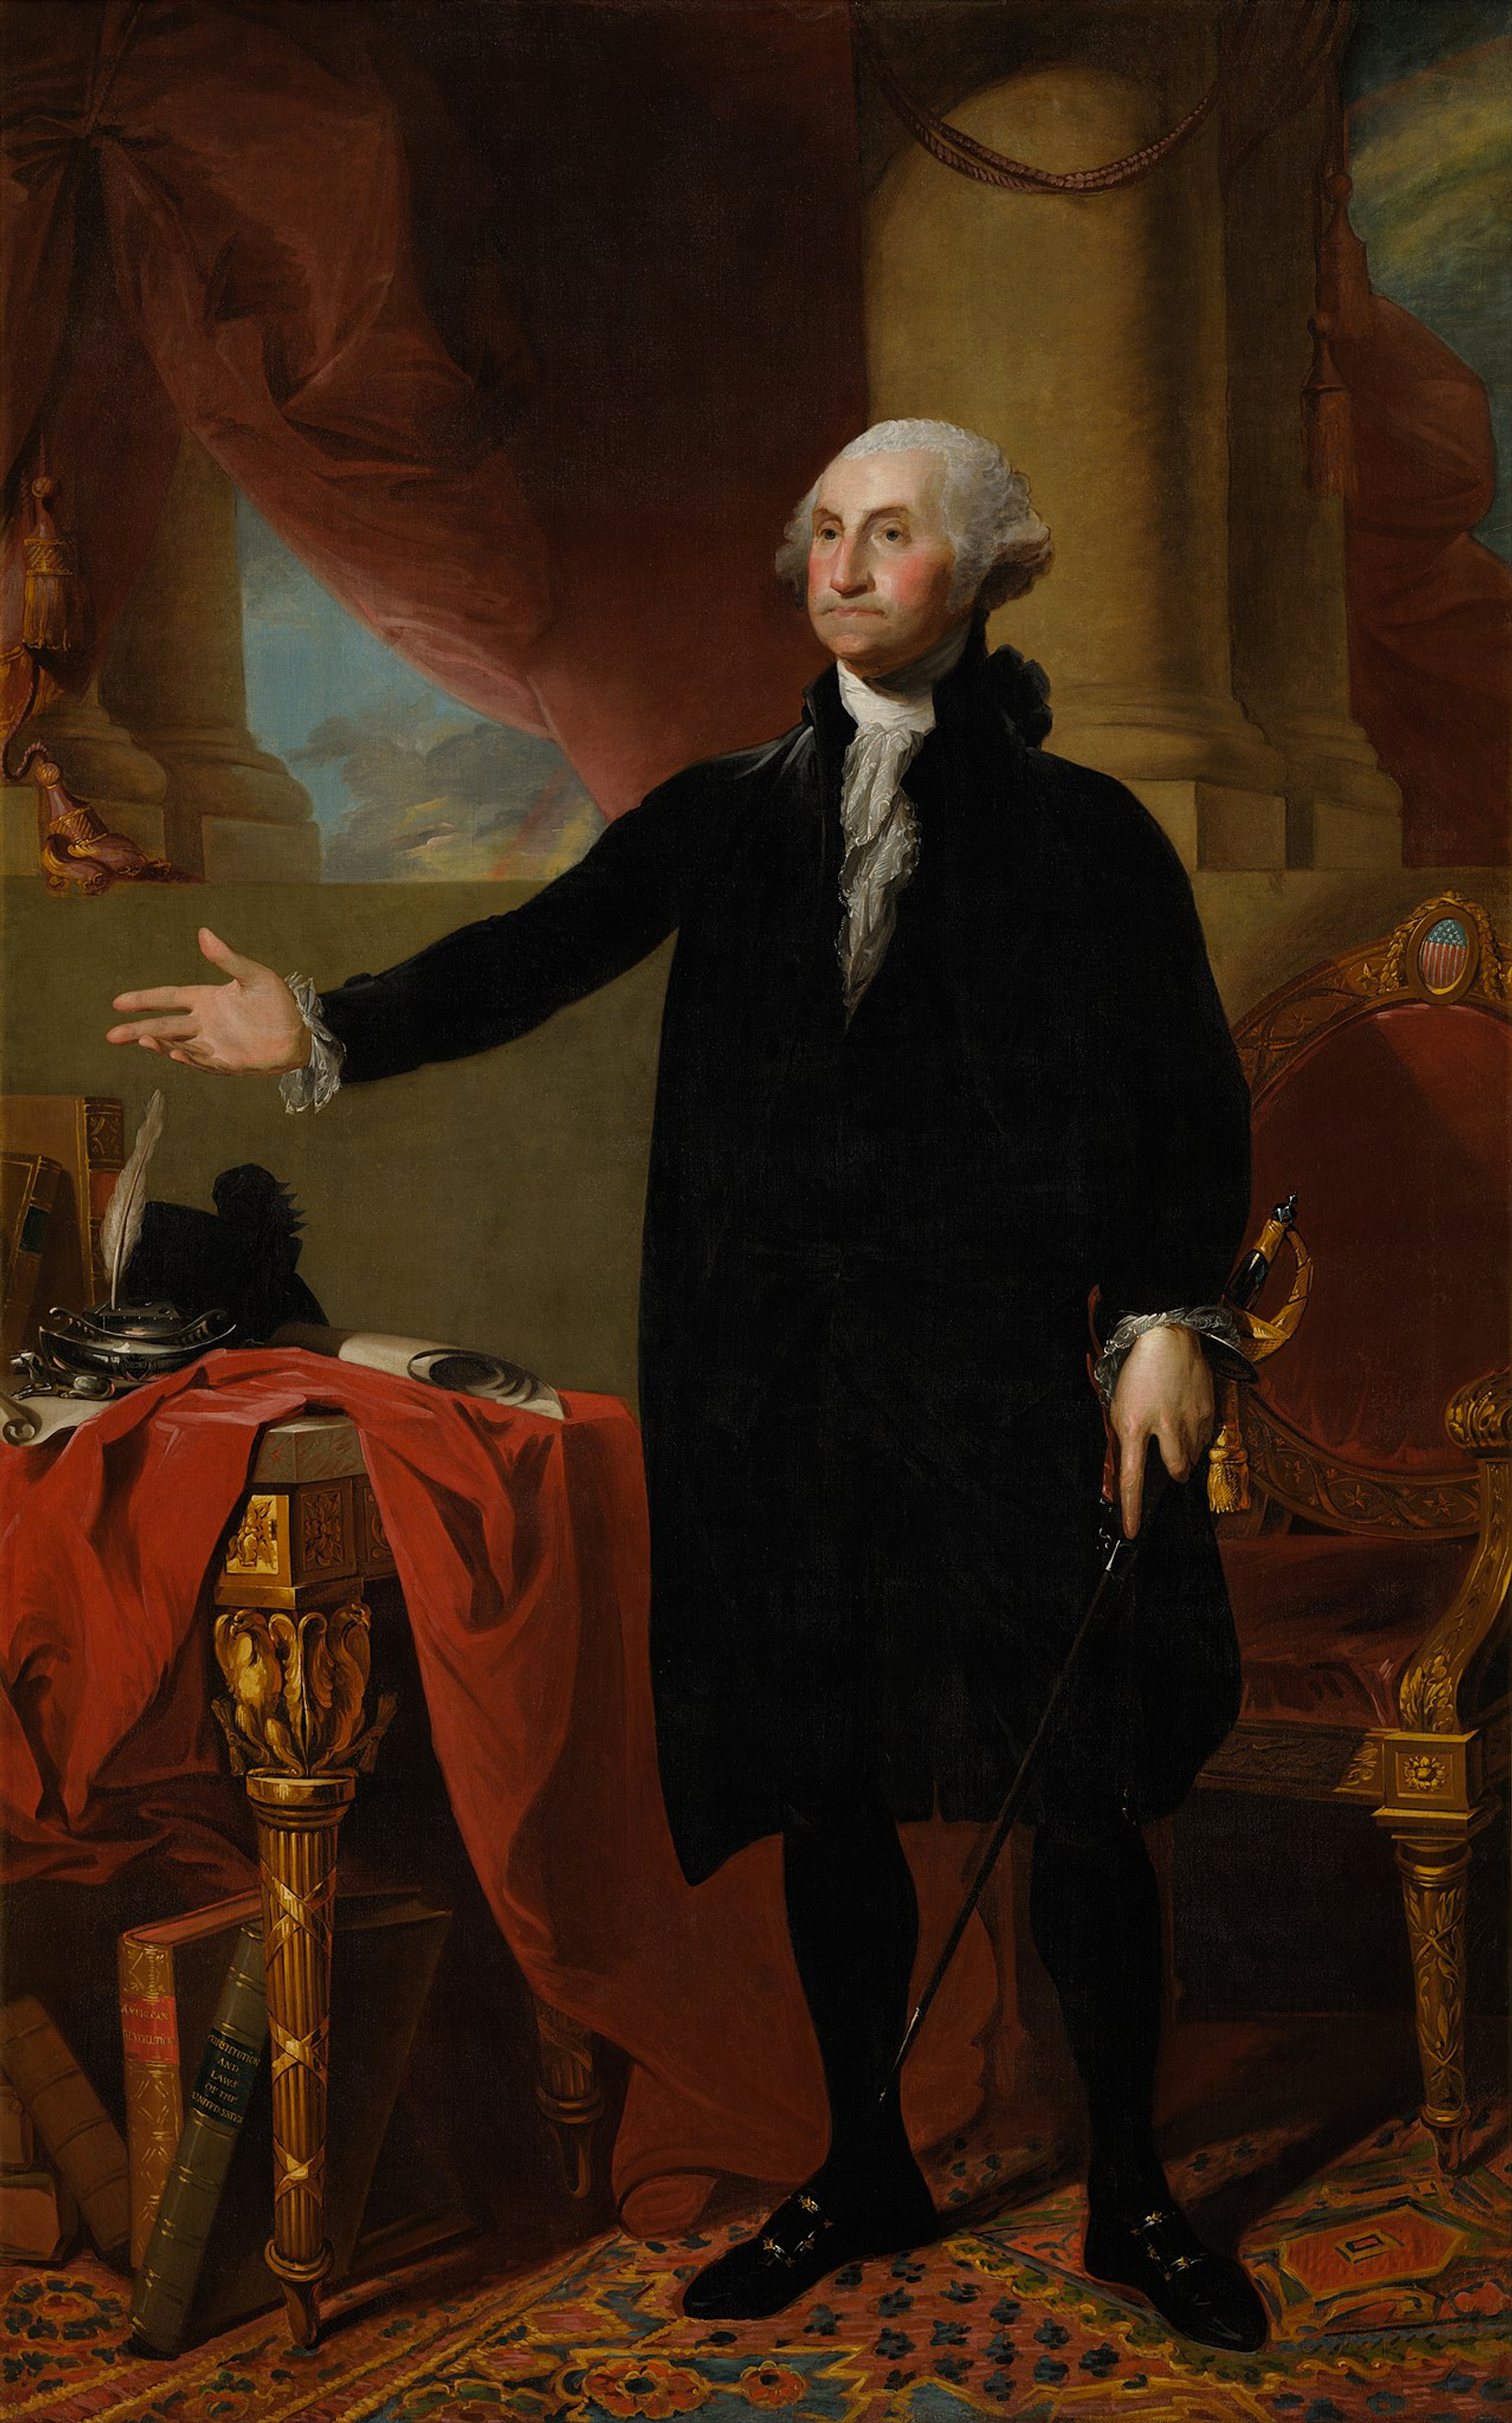 A portrait of President George Washington by Gilbert Stuart. A man standing with a with his right hand outstretched and a sword in his left hand. 